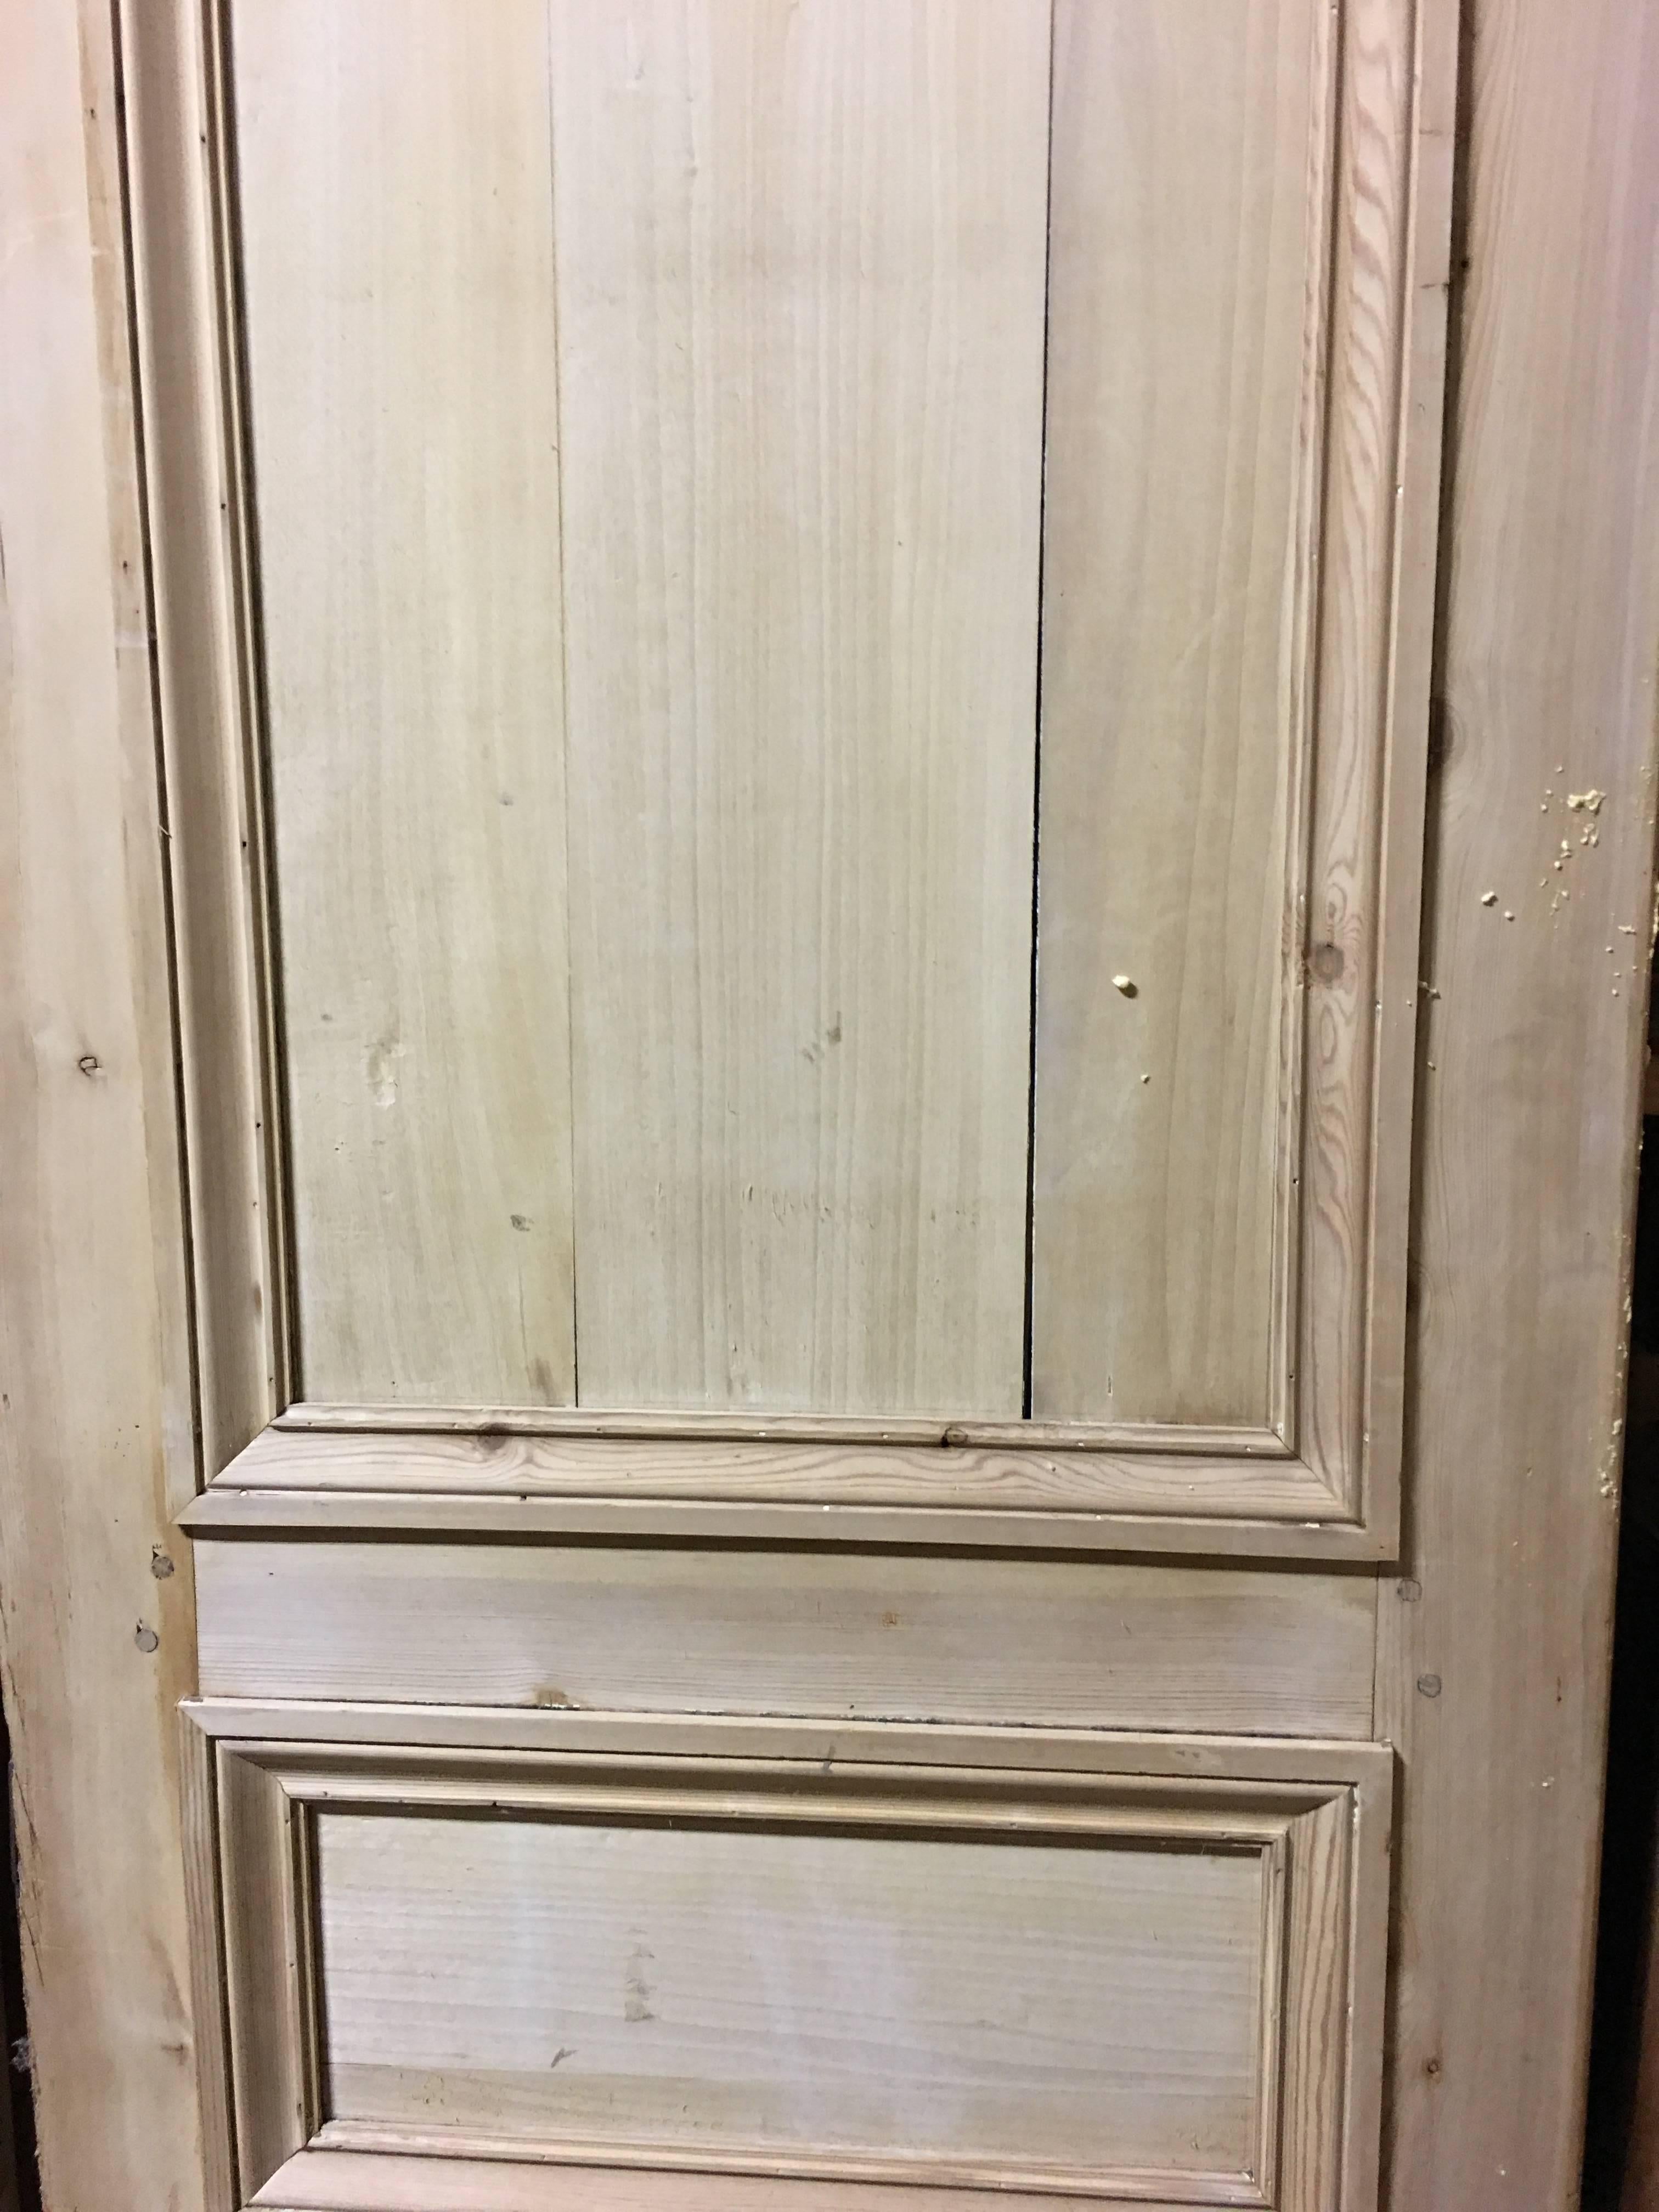 Early 
19th century French pine and apple doors
(many more similar doors available).
27''w x 101''h x 1''d